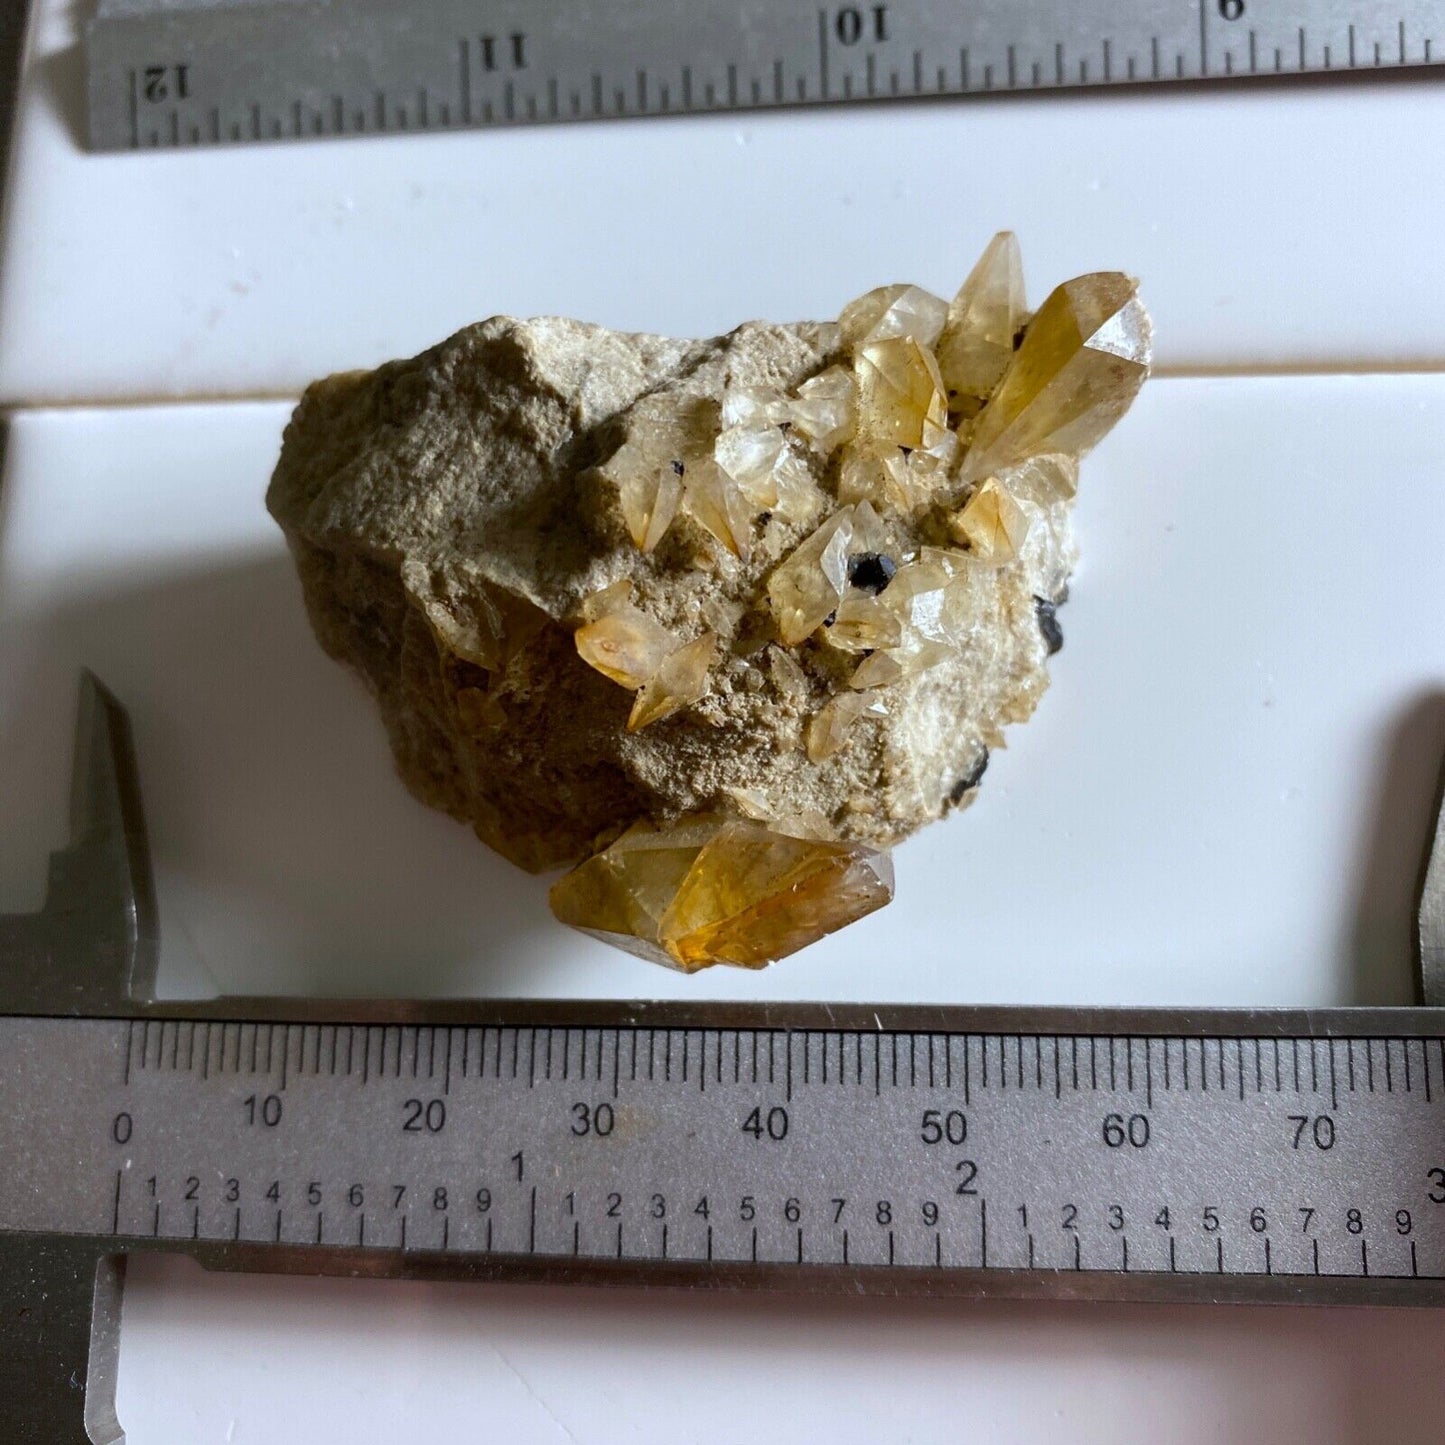 CALCITE/HYDROCARBON CLASSIC PIECE FROM INDIANA, USA 36g MF742